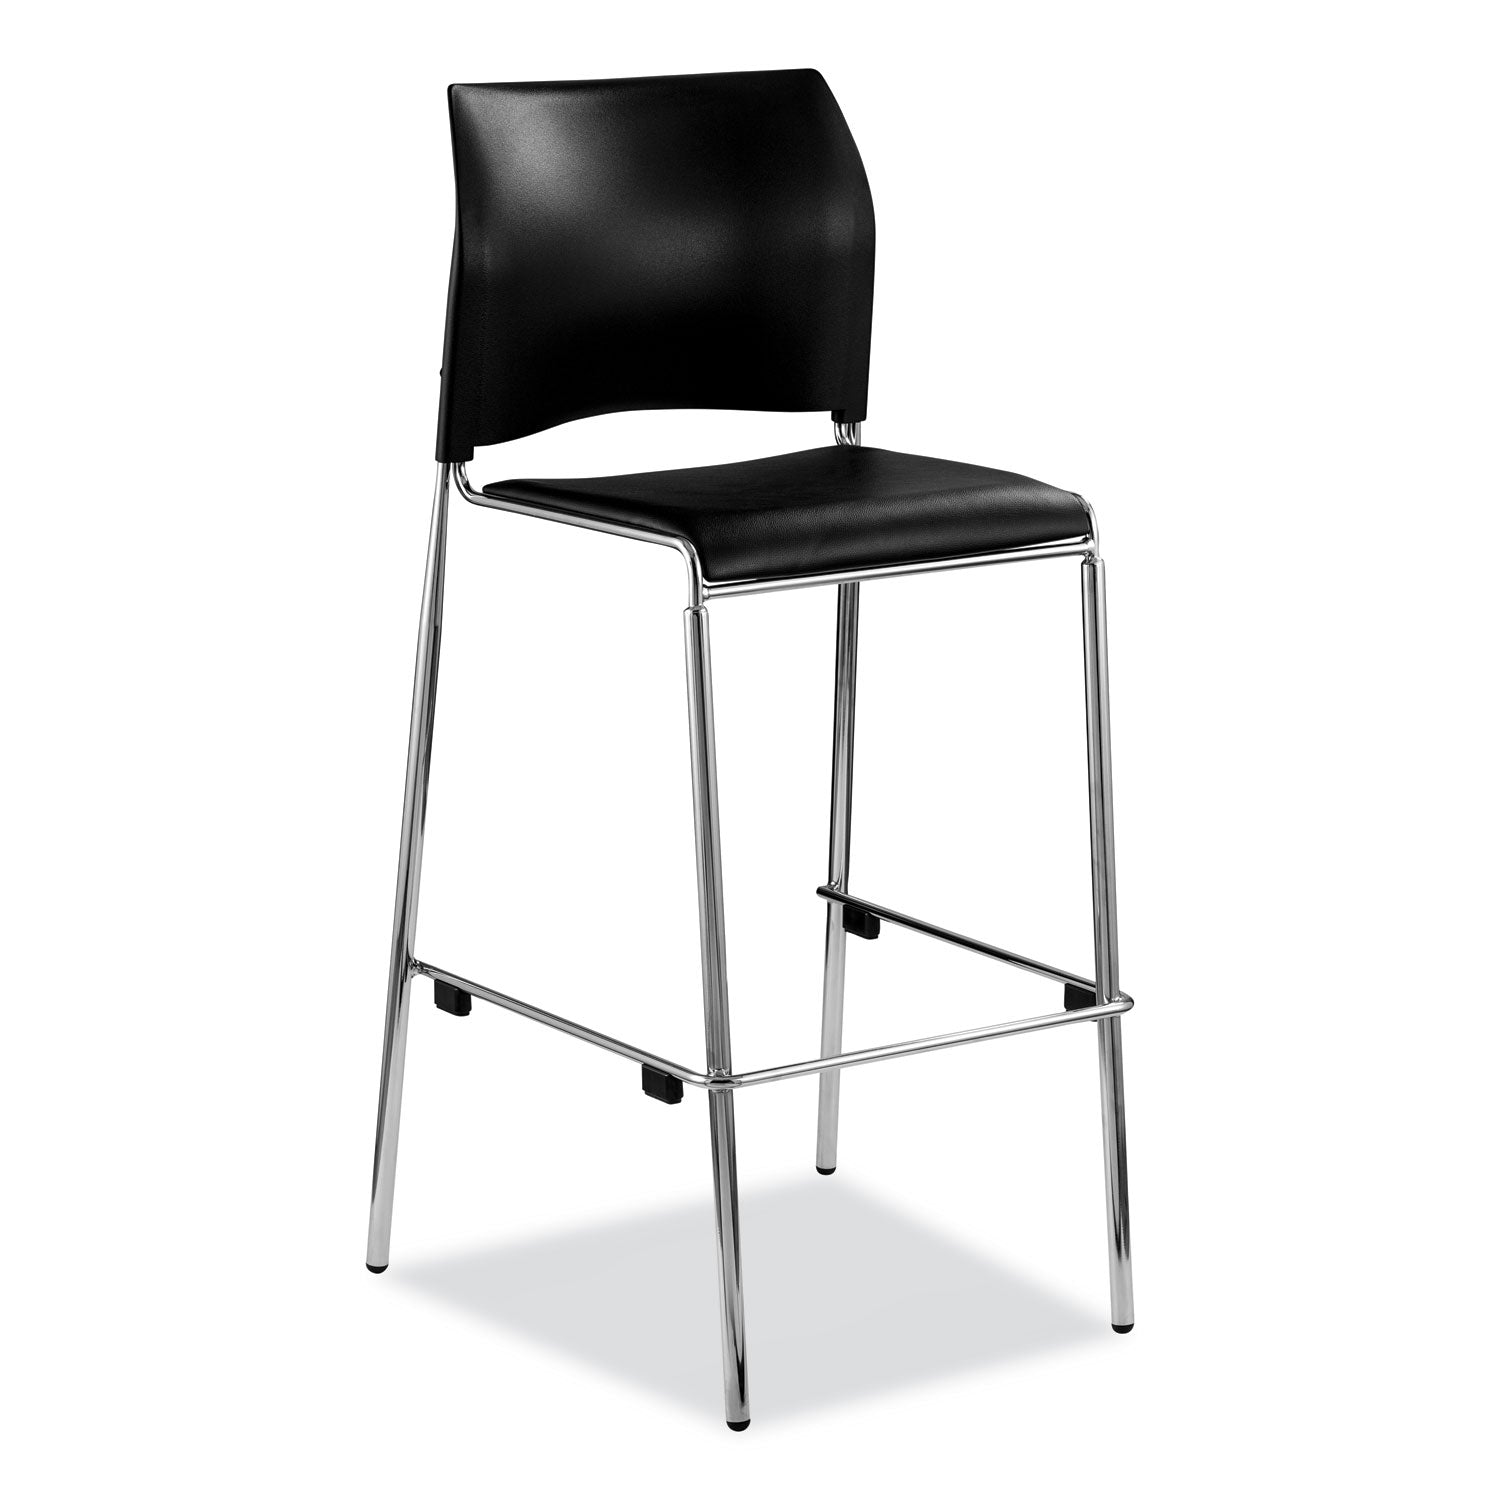 cafetorium-bar-height-stool-padded-seat-back-supports-500lb-31-seat-ht-black-seat-backchrome-baseships-in-1-3-bus-days_nps8710b1110 - 4